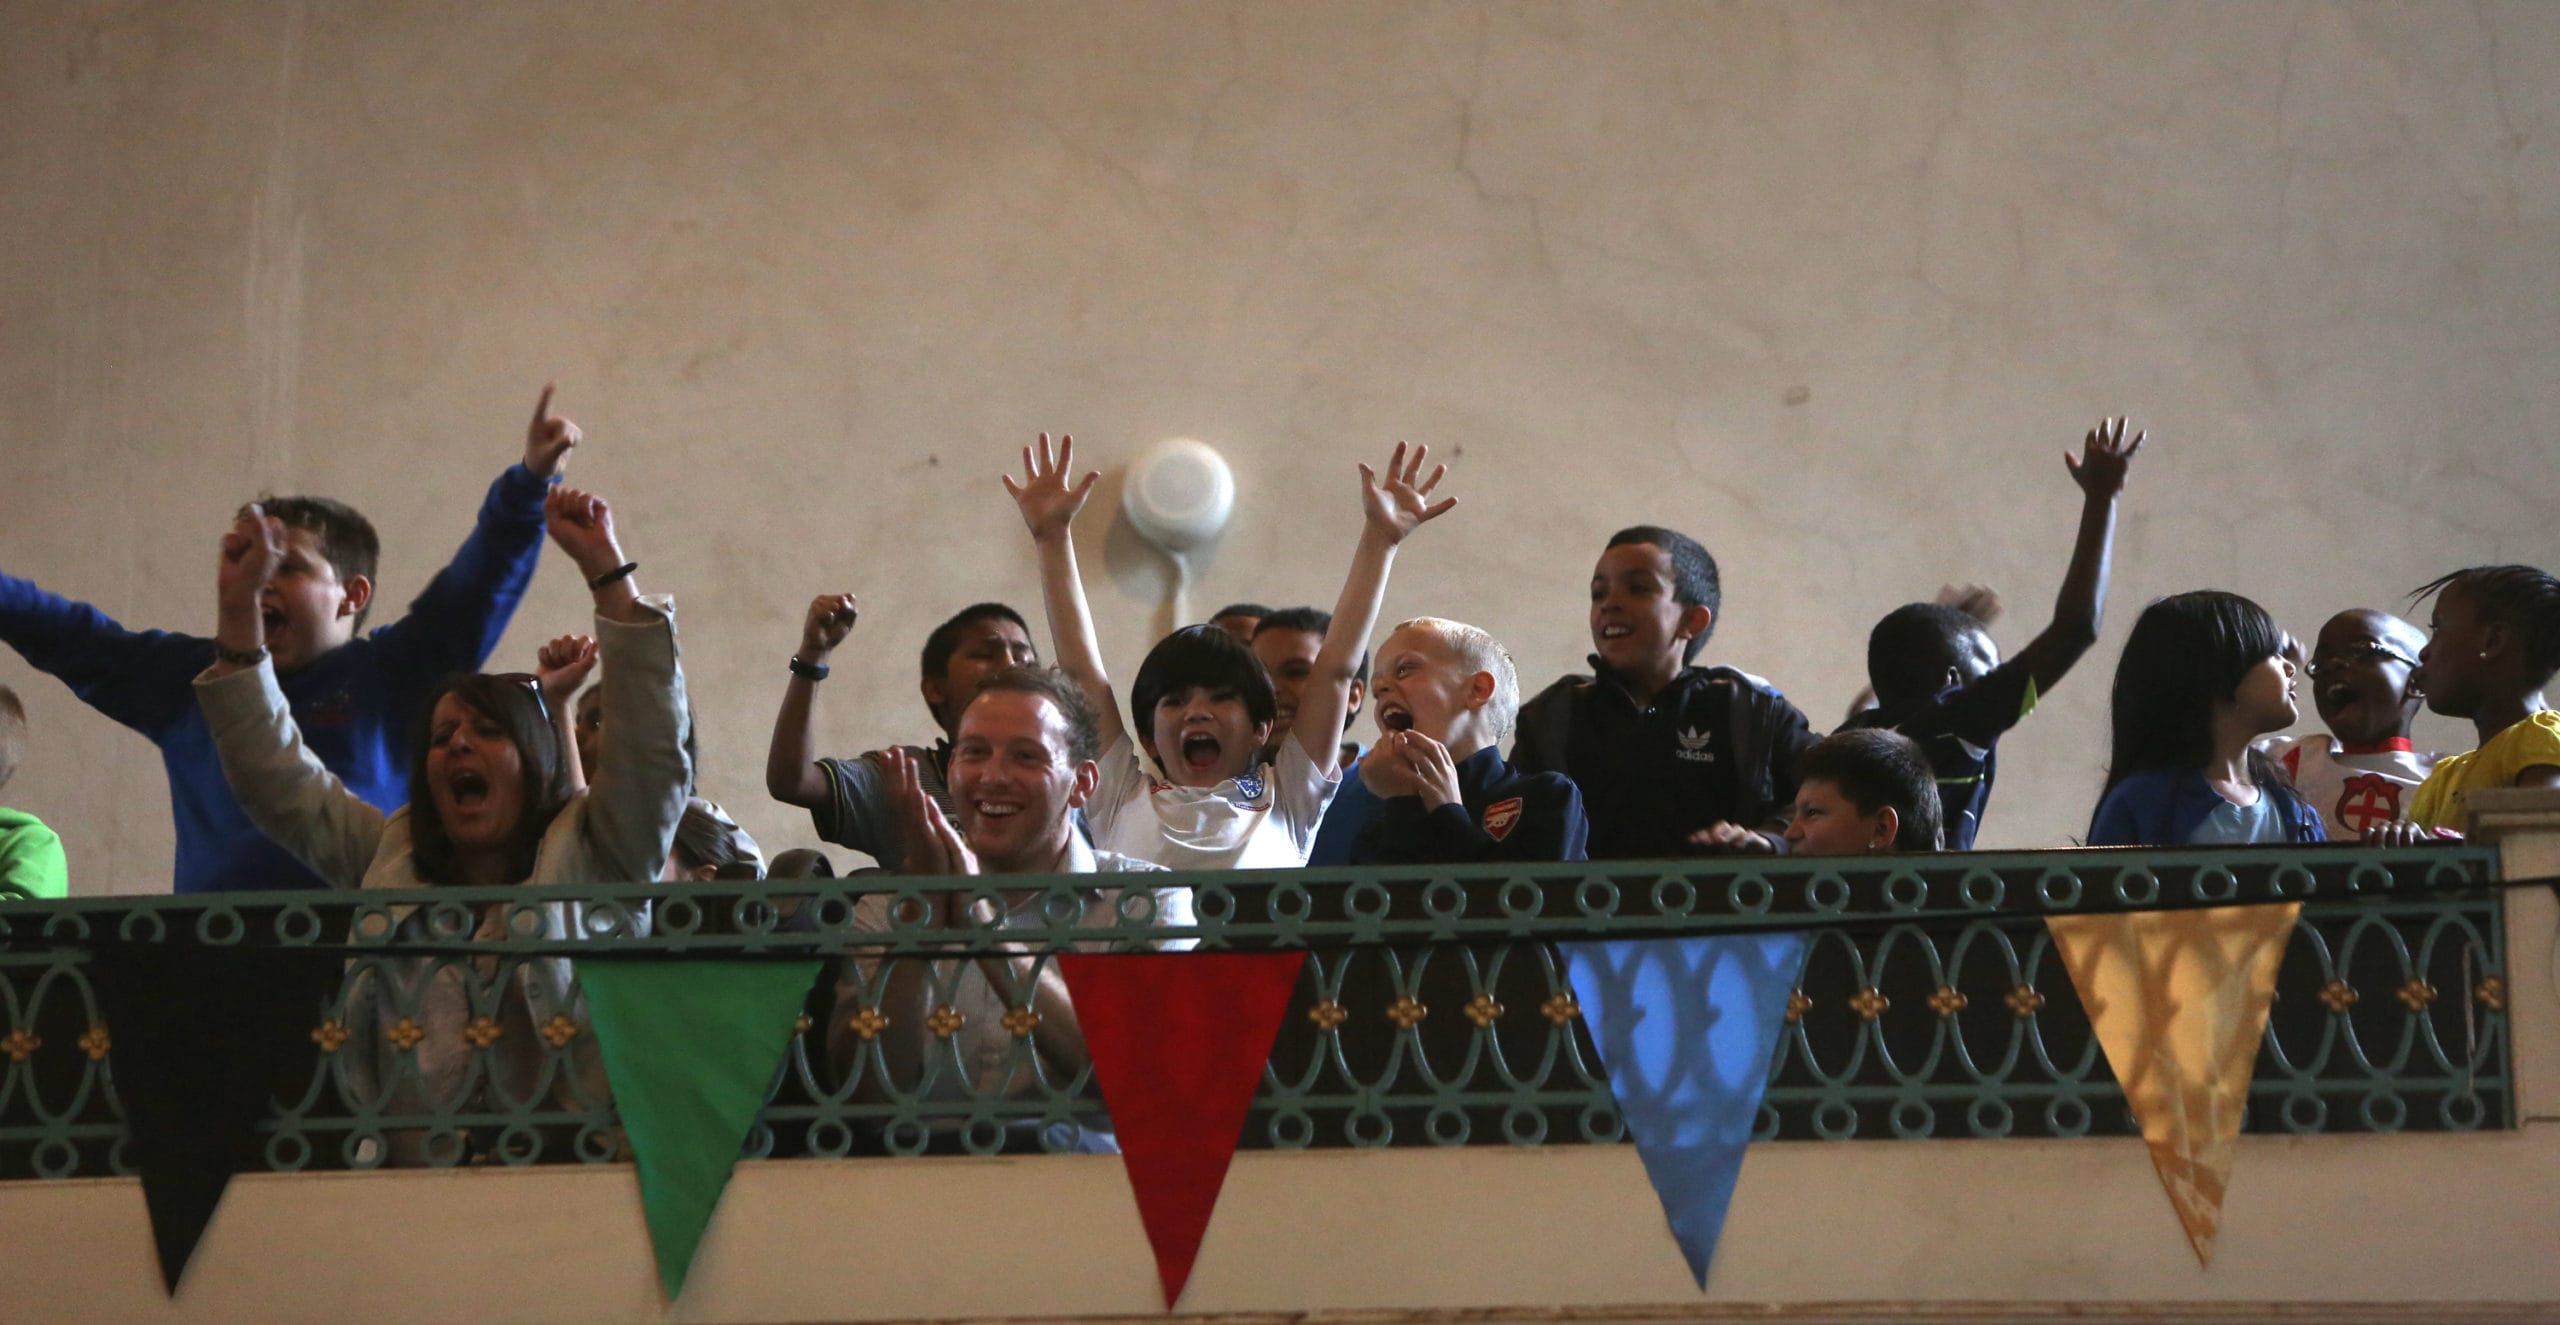 A group of young people on a balcony. They have their arms in the air and are cheering.